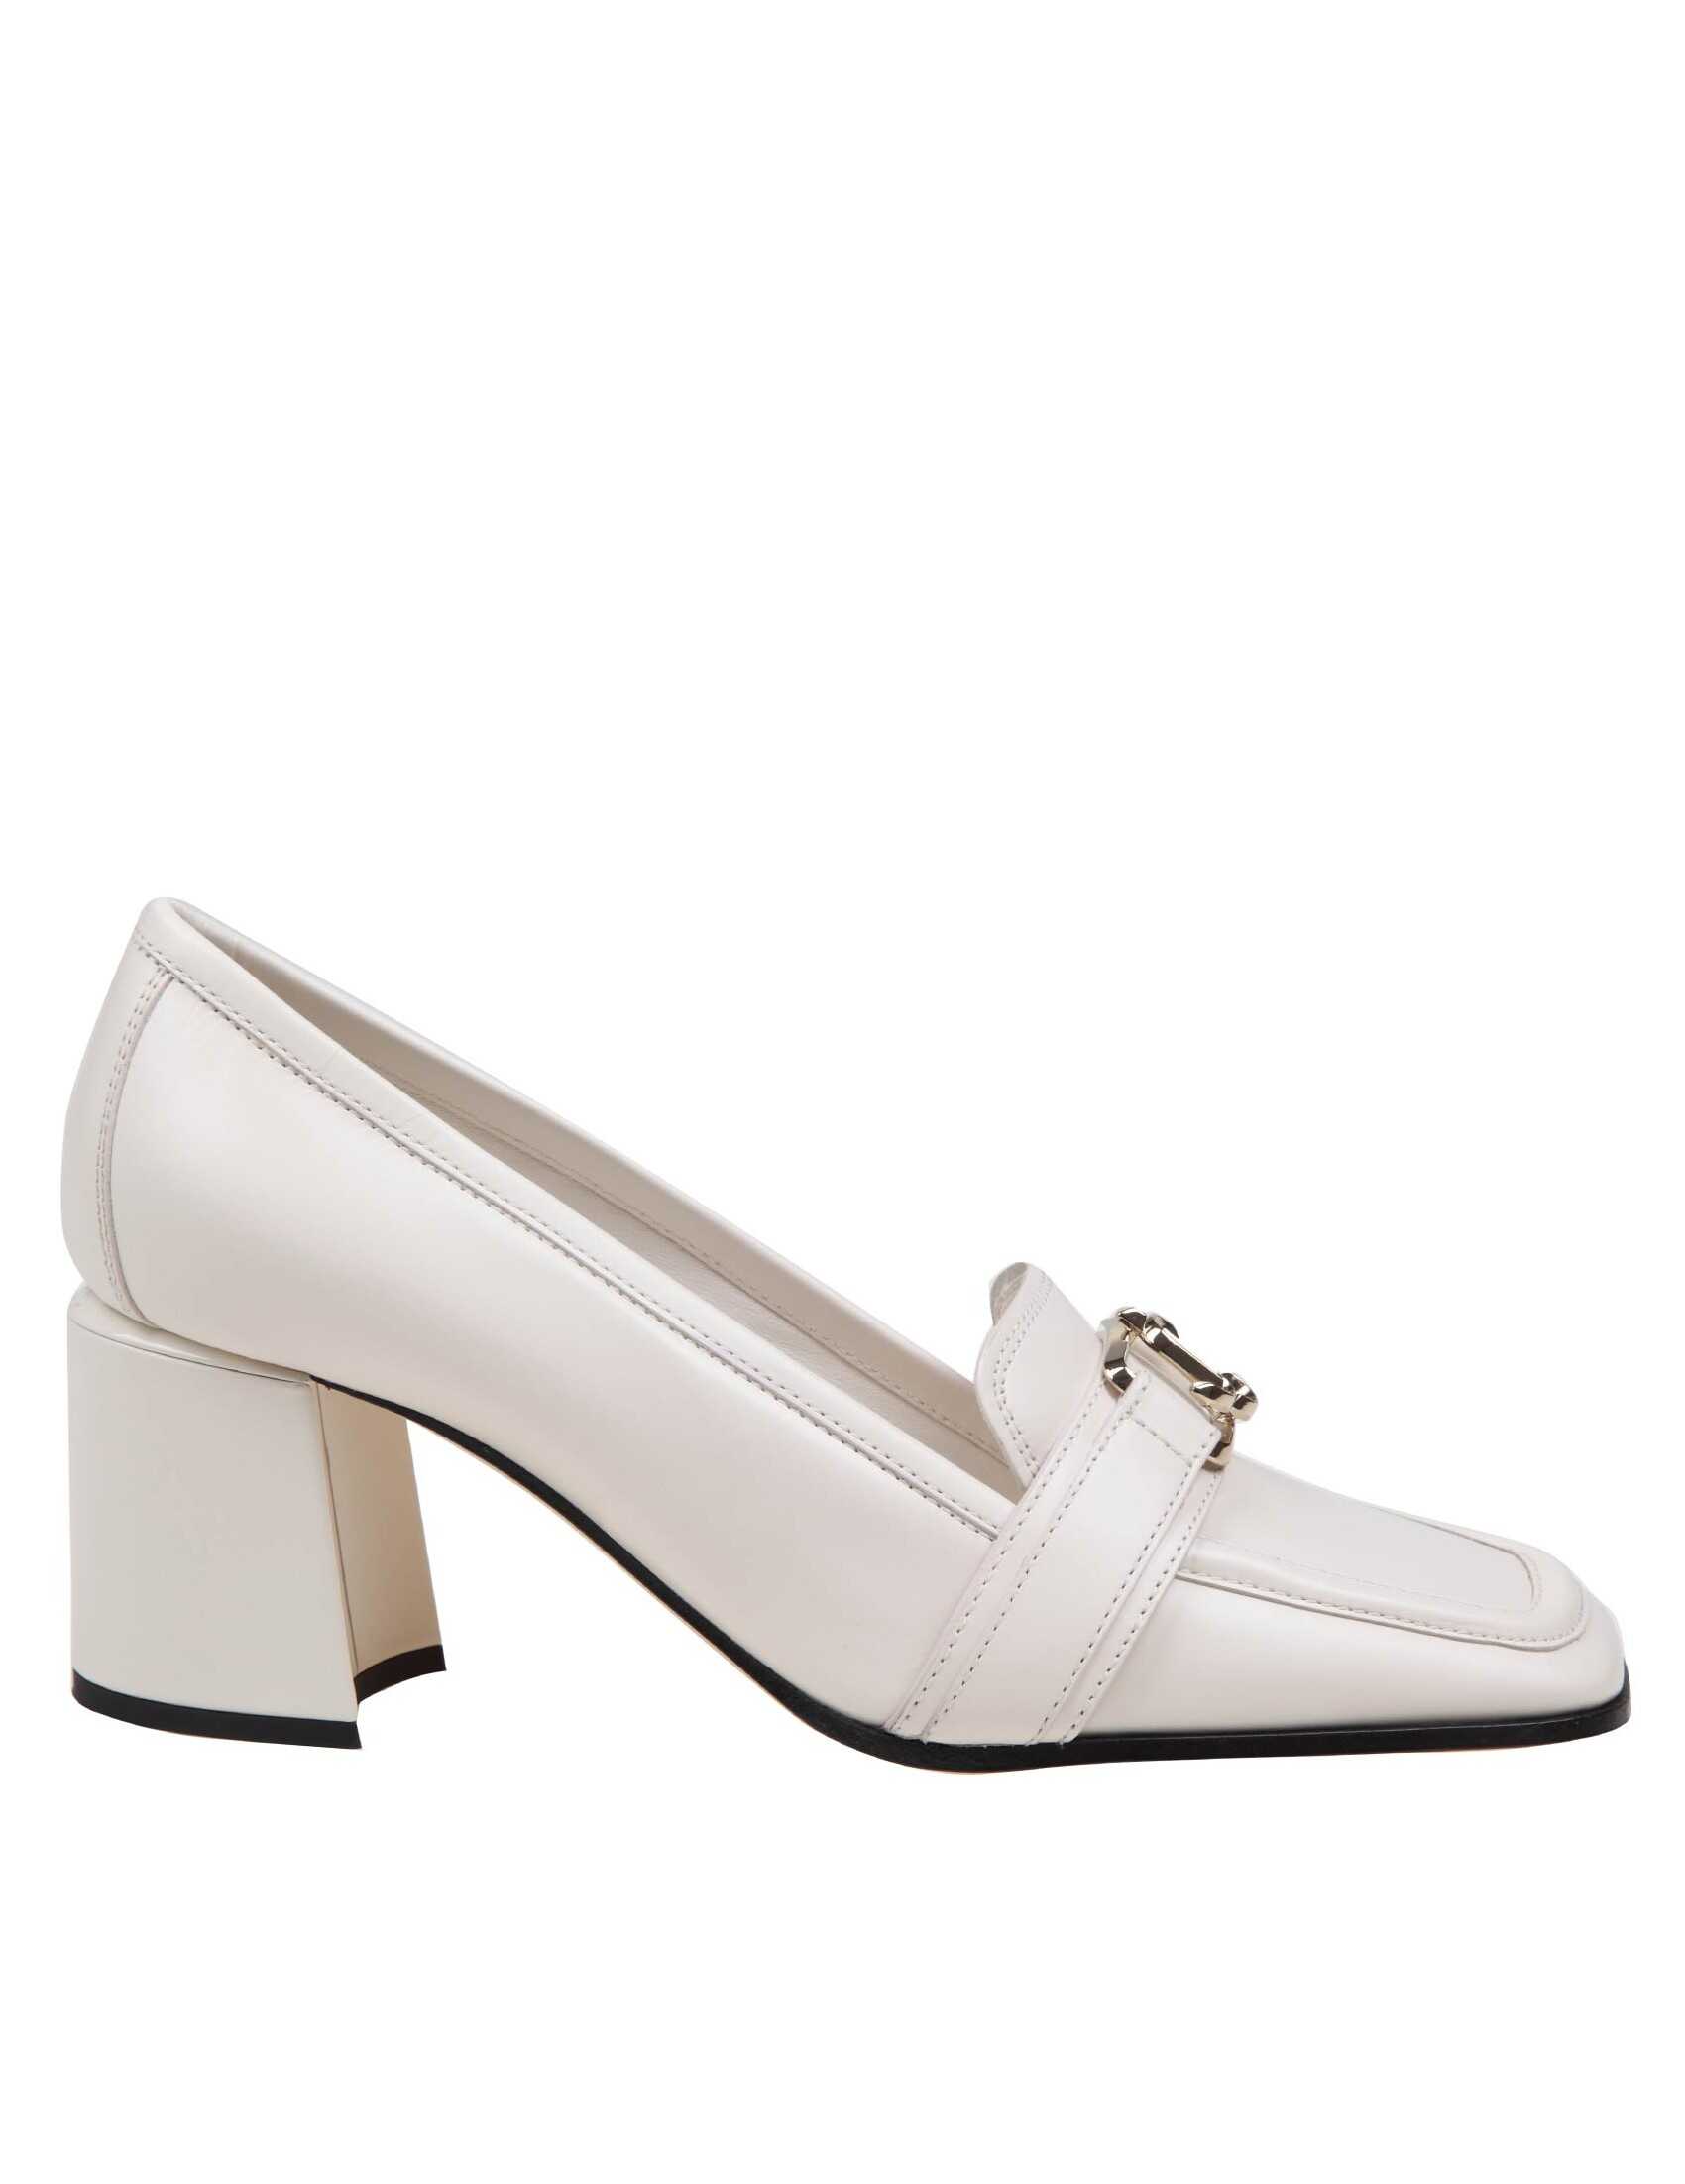 Jimmy Choo Jimmy choo loafers with heel in milk color leather Beige